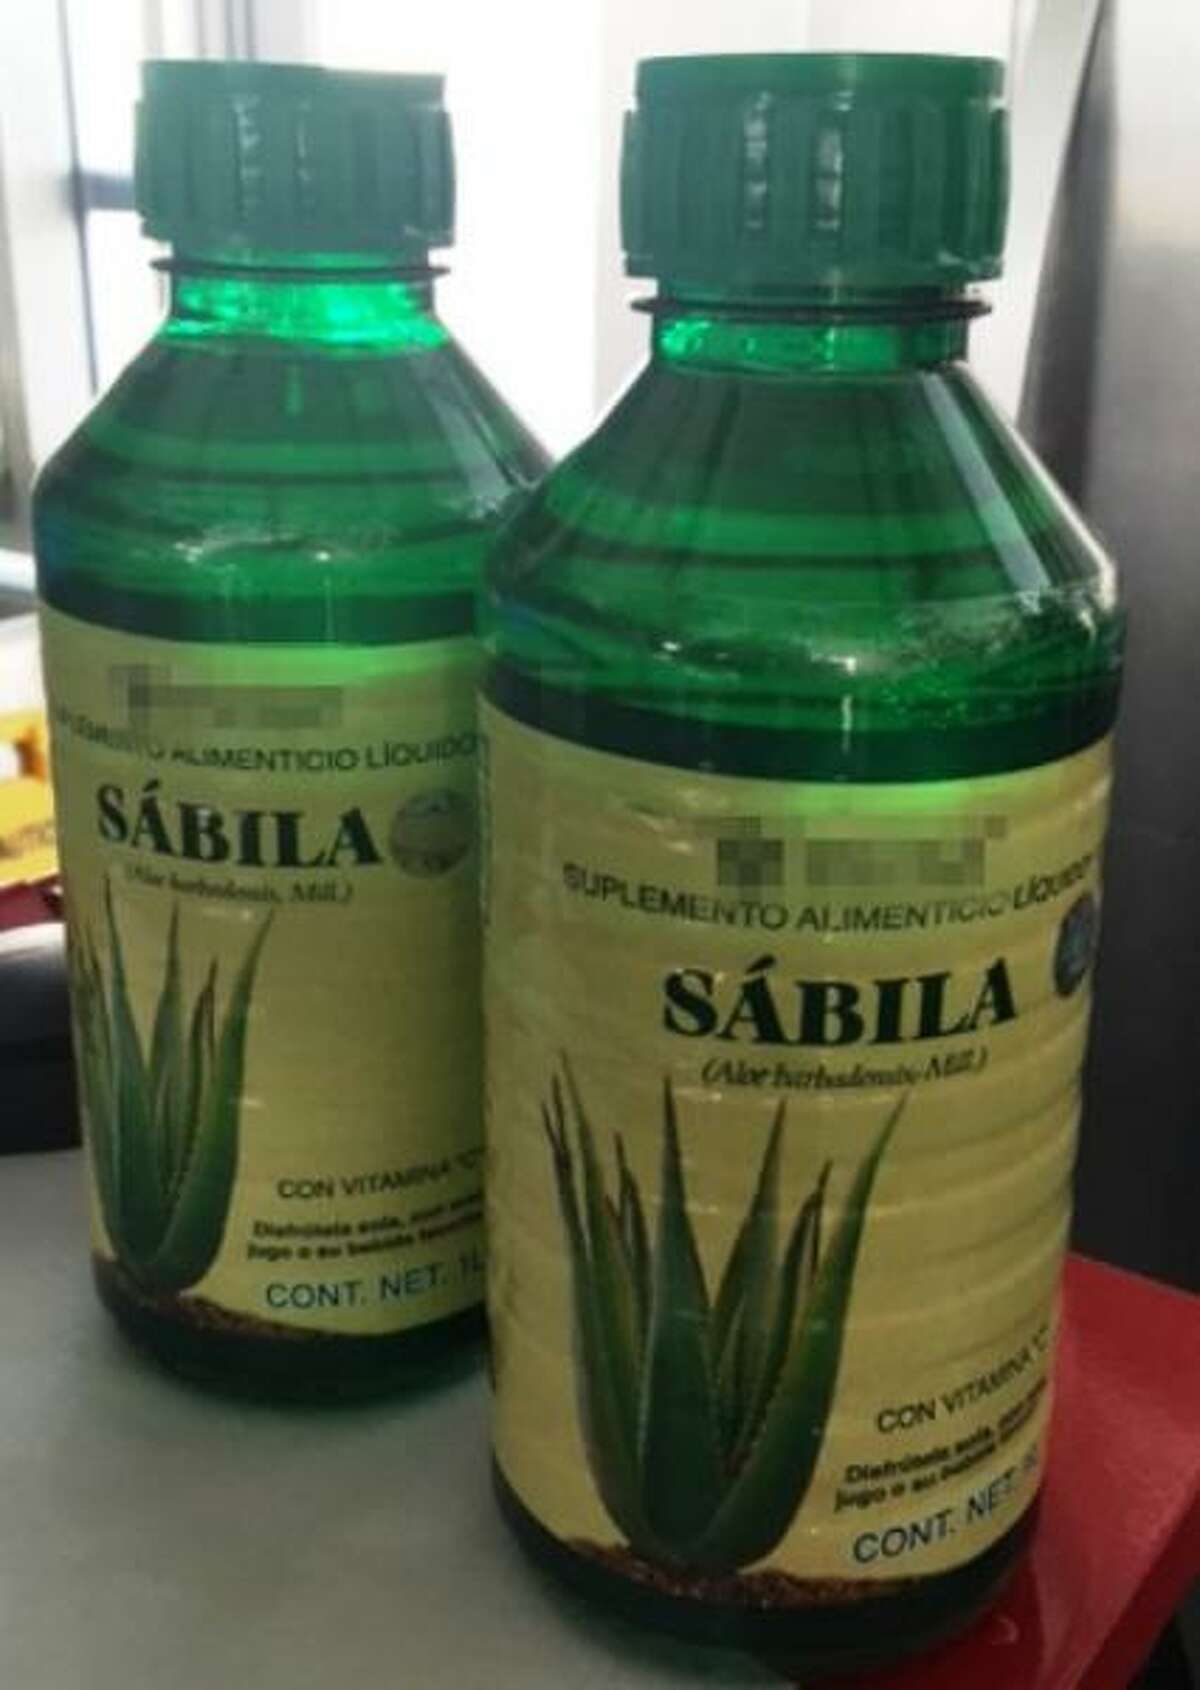 A man was recently caught trying to smuggle meth in aloe vera bottles through the Colombia Solidarity International Bridge, according to federal authorities.